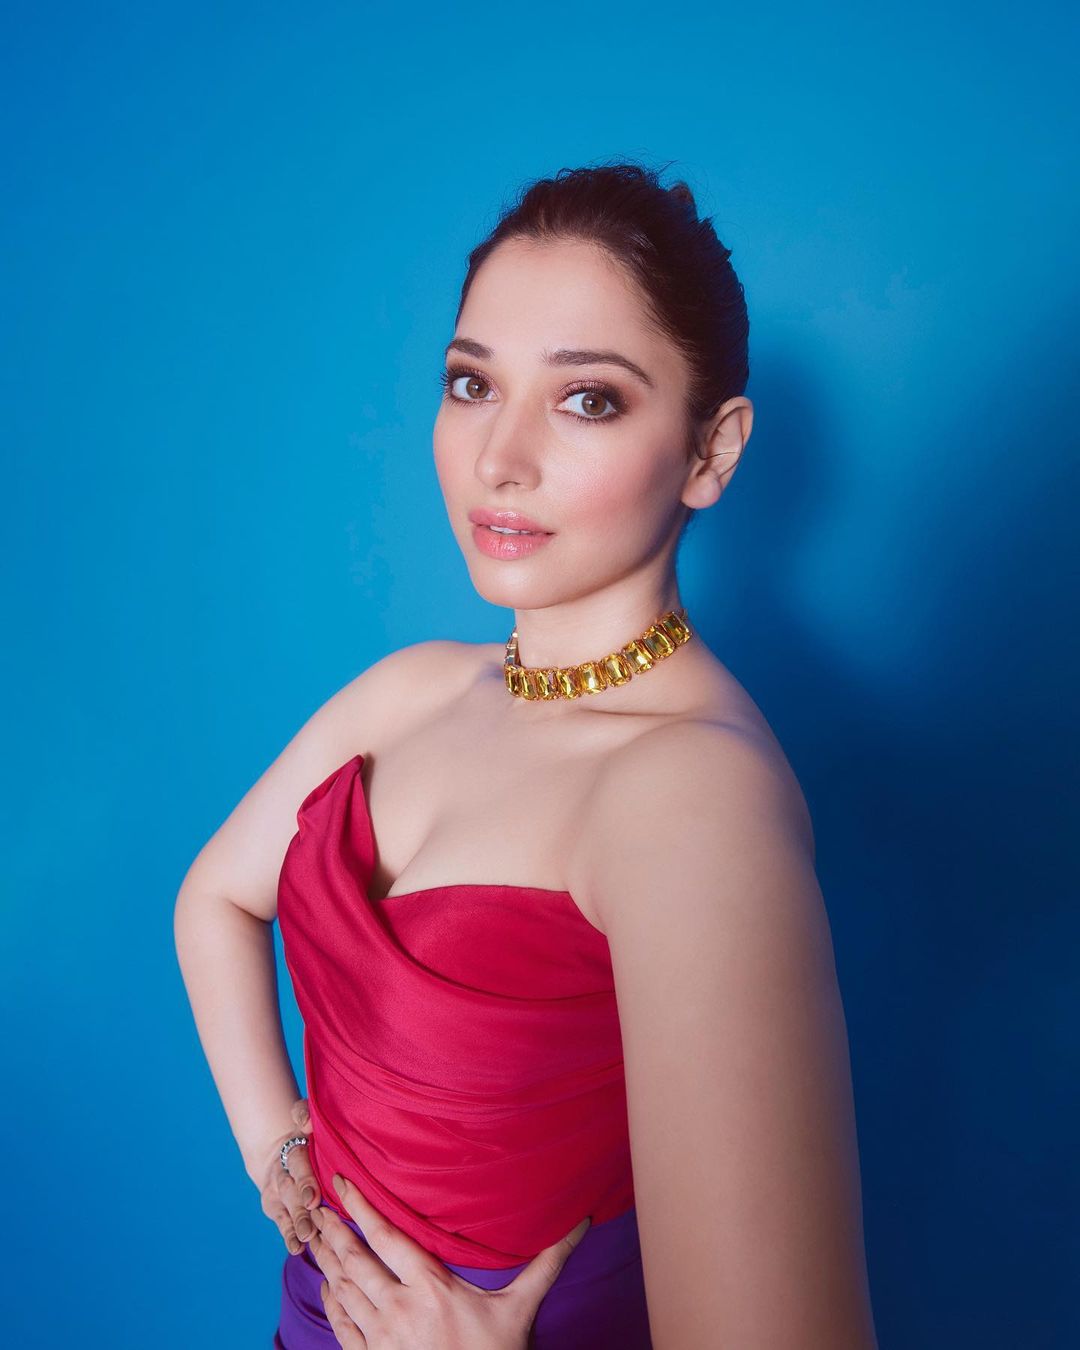 Tamannaah wears Pink and Purple Outfit  Designed by Saisha Shinde, December 2021 1